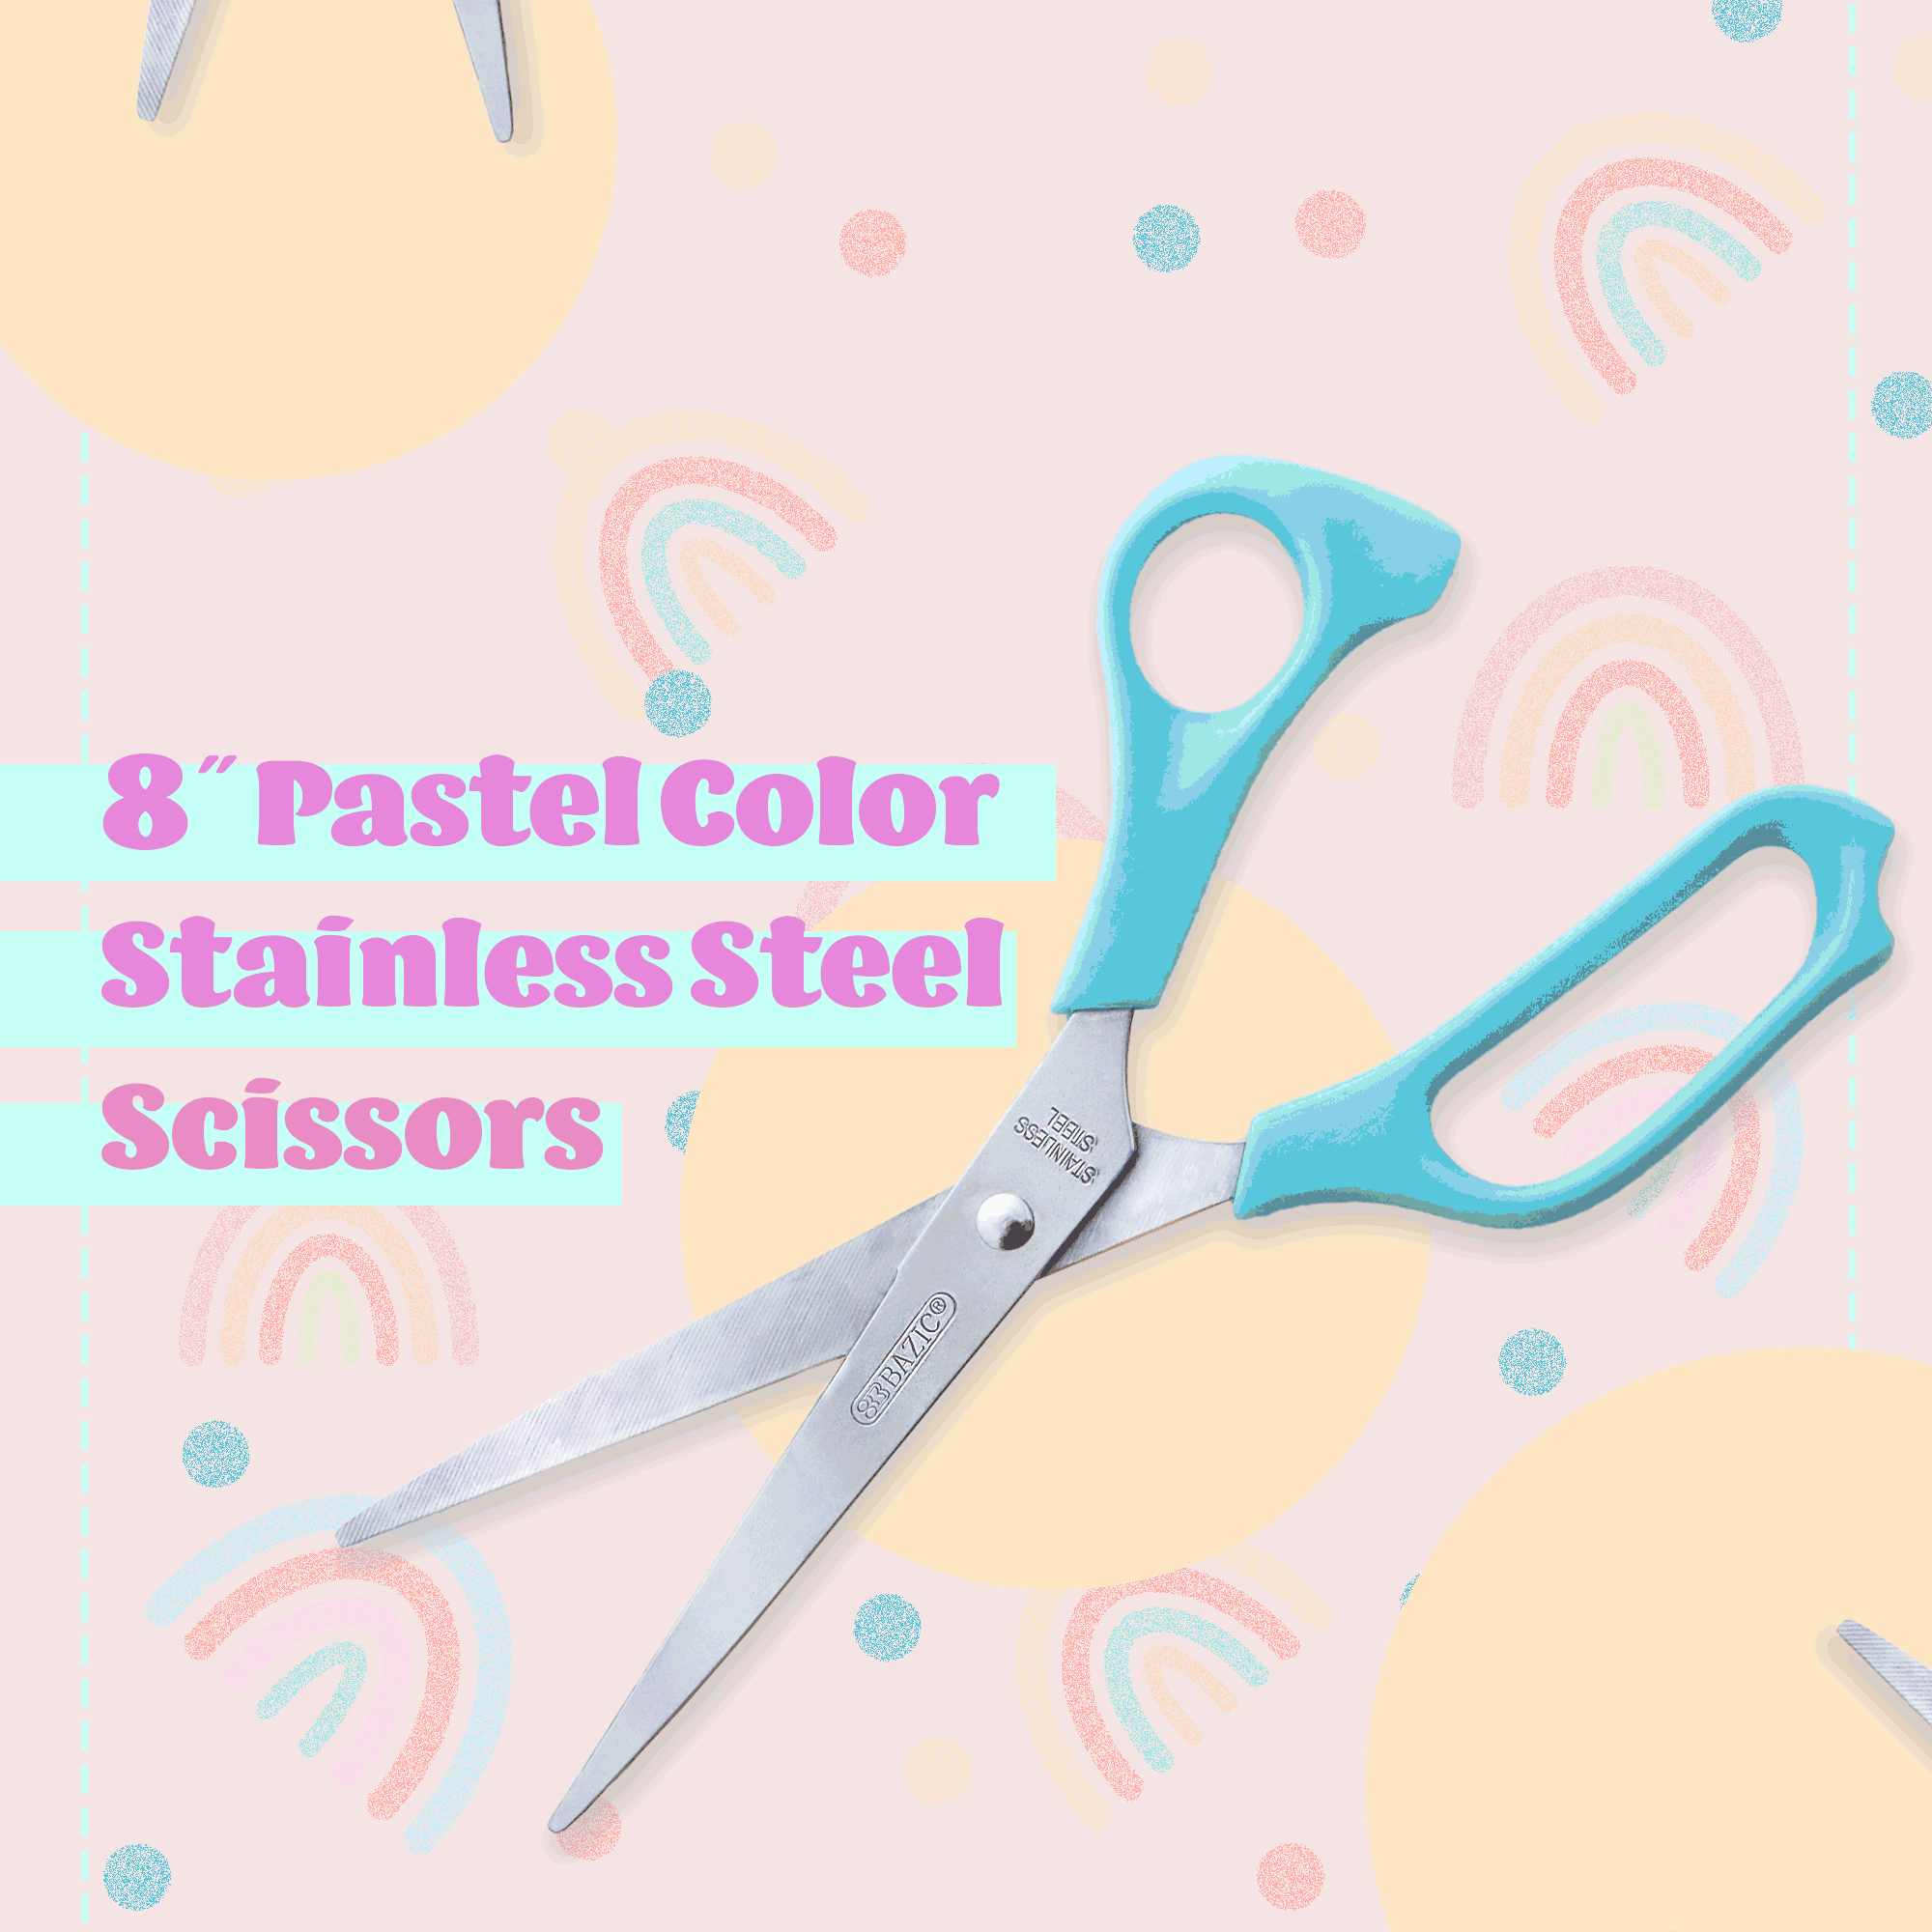 NEW: 8 Pastel Color Stainless Steel Scissors